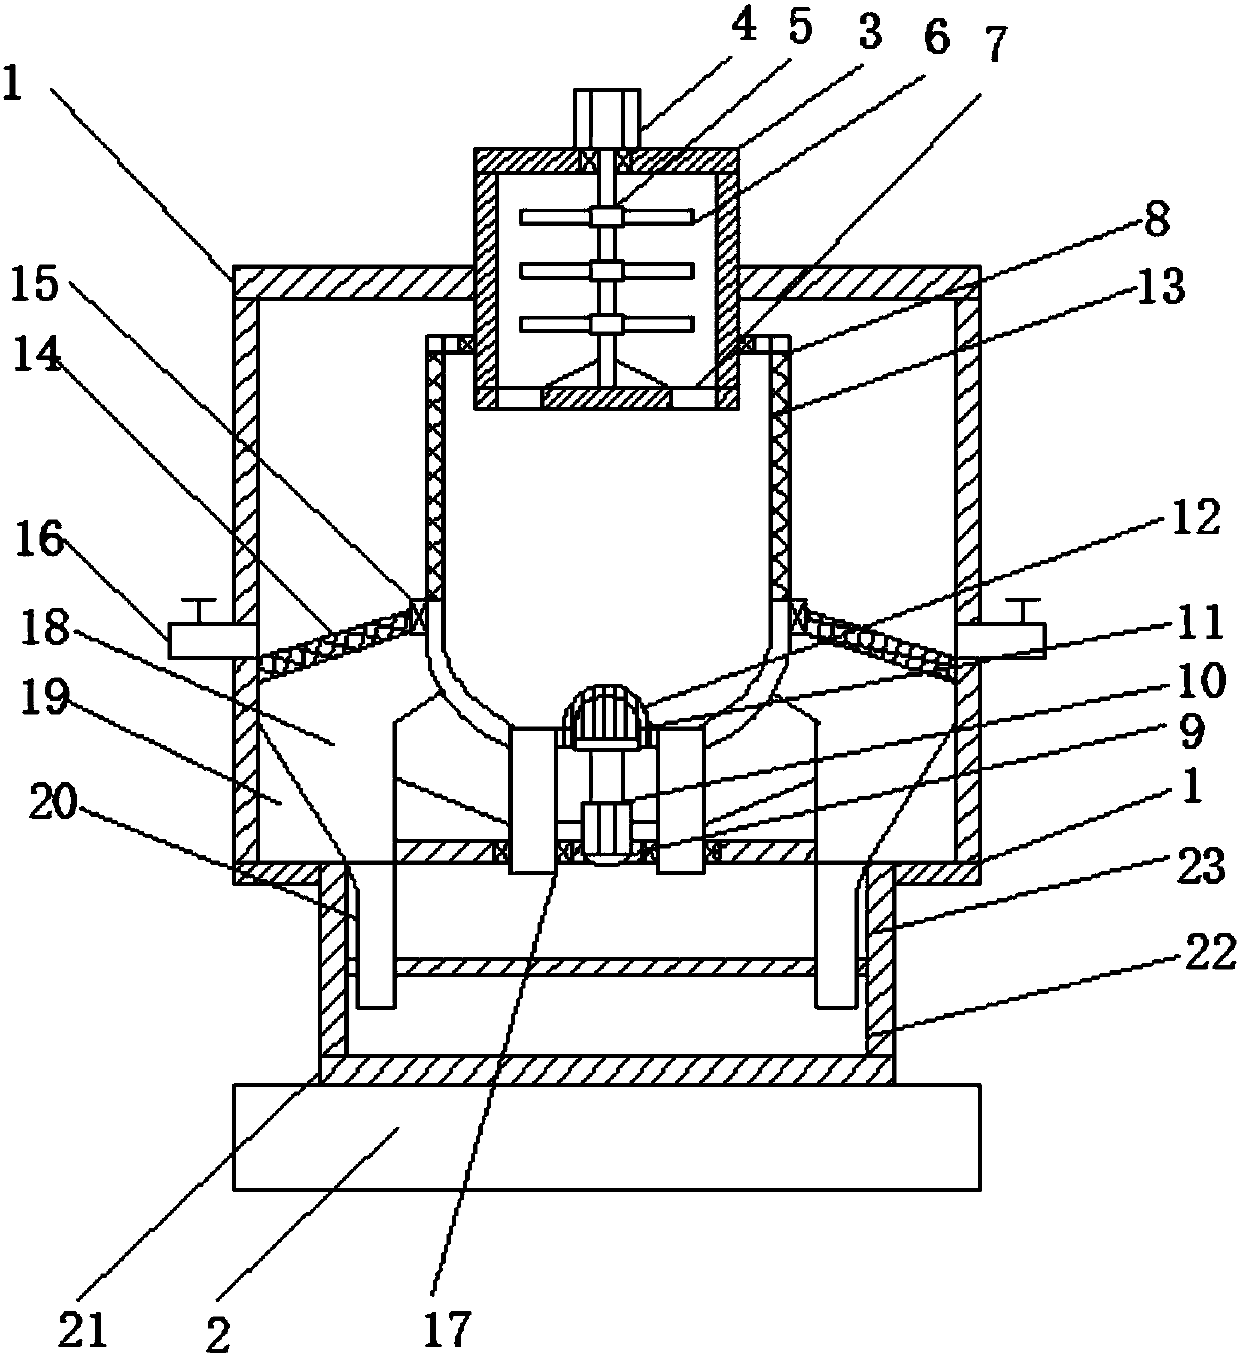 Sandstone separation device capable of conveying materials conveniently and conducting multi-stage material screening